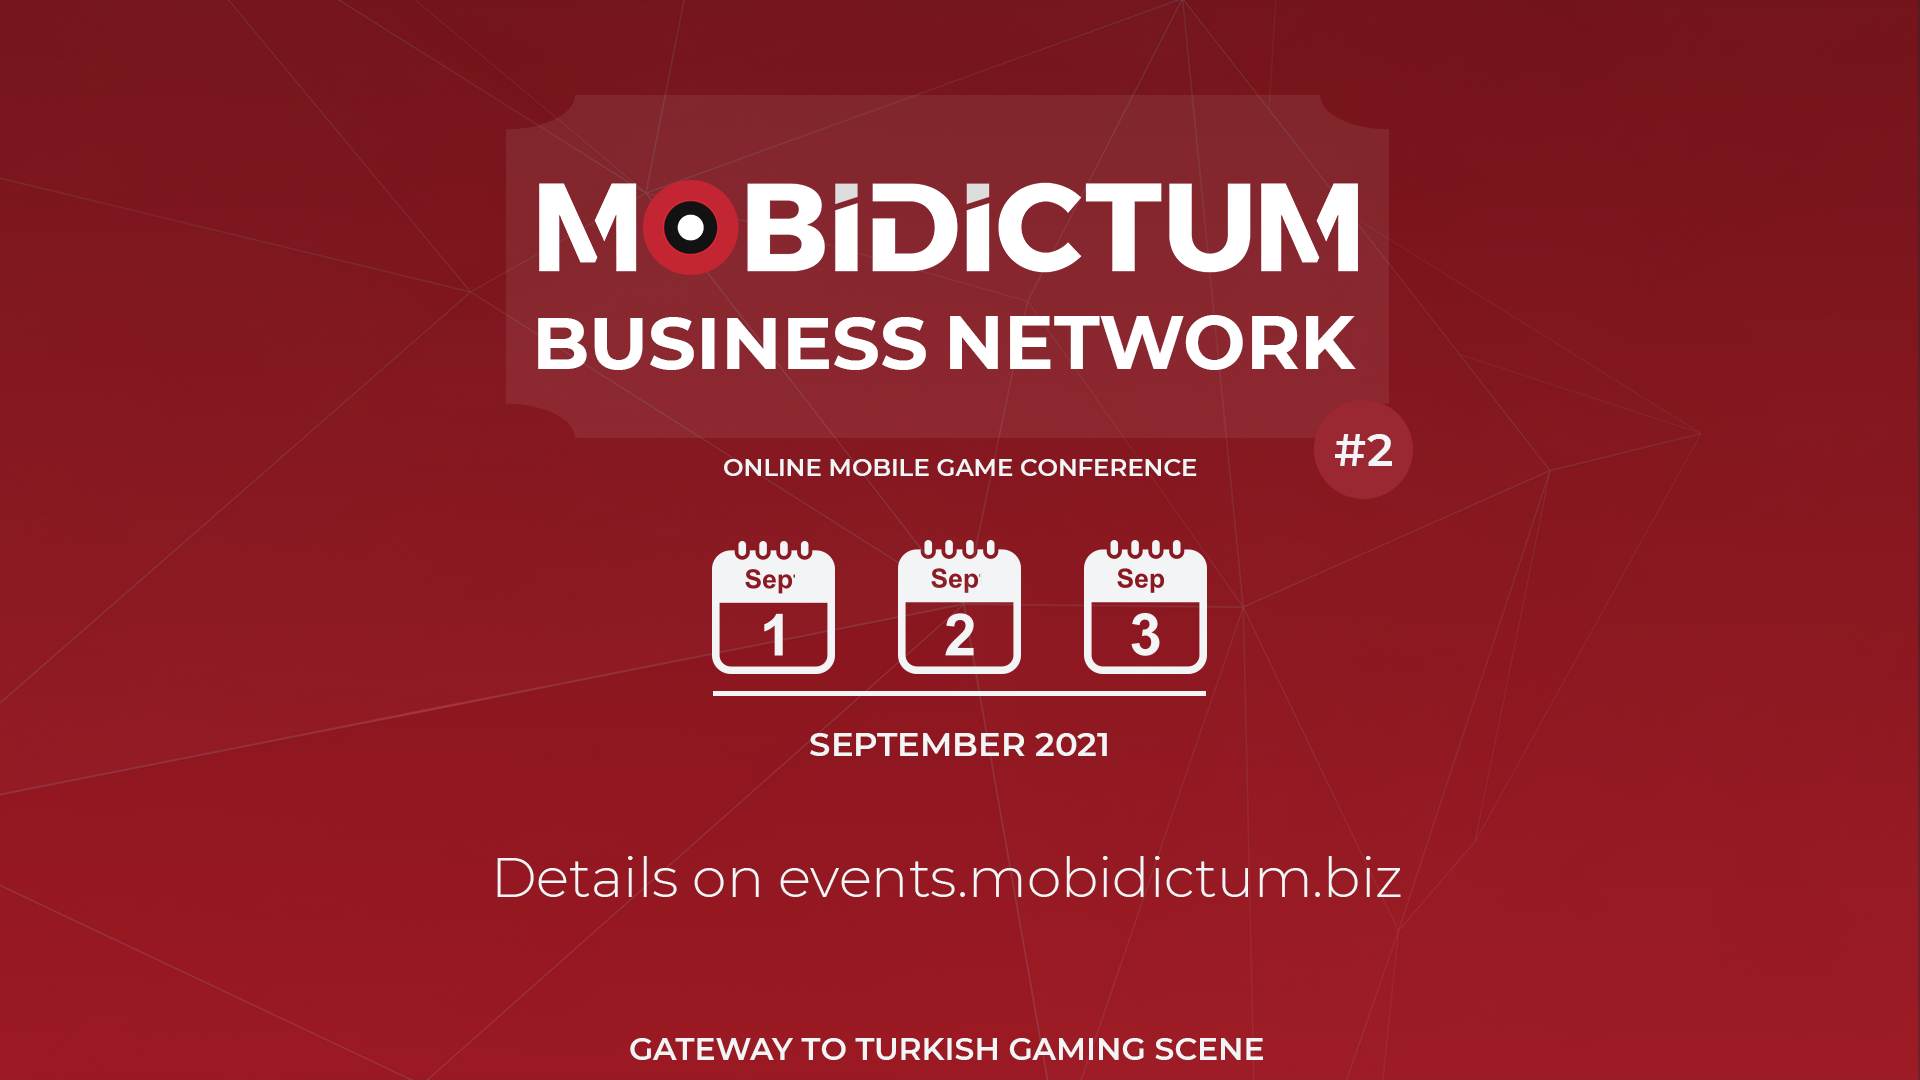 The mobile game industry meets: Mobidictum Business Network #2 is coming!